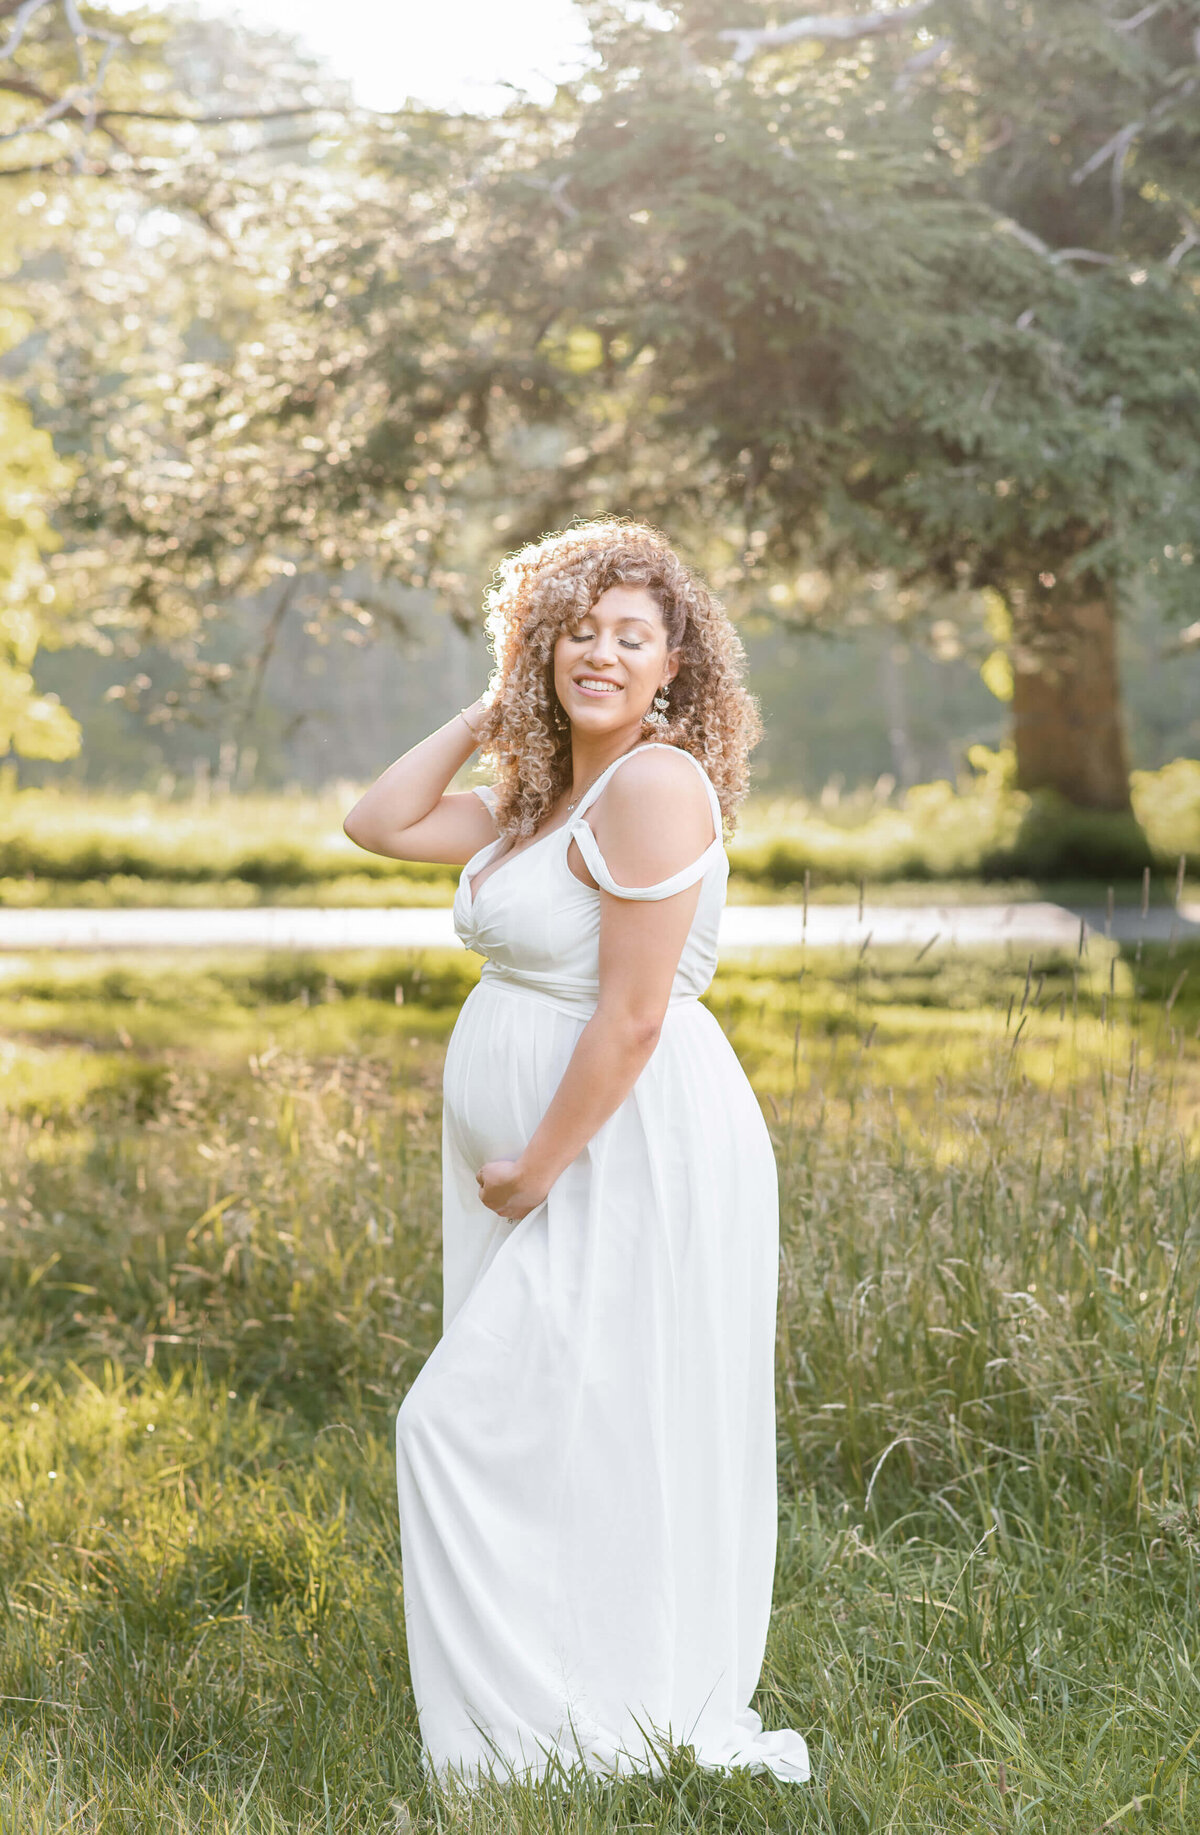 Pregnant women o a field with at golden hour in Acworth Georgia